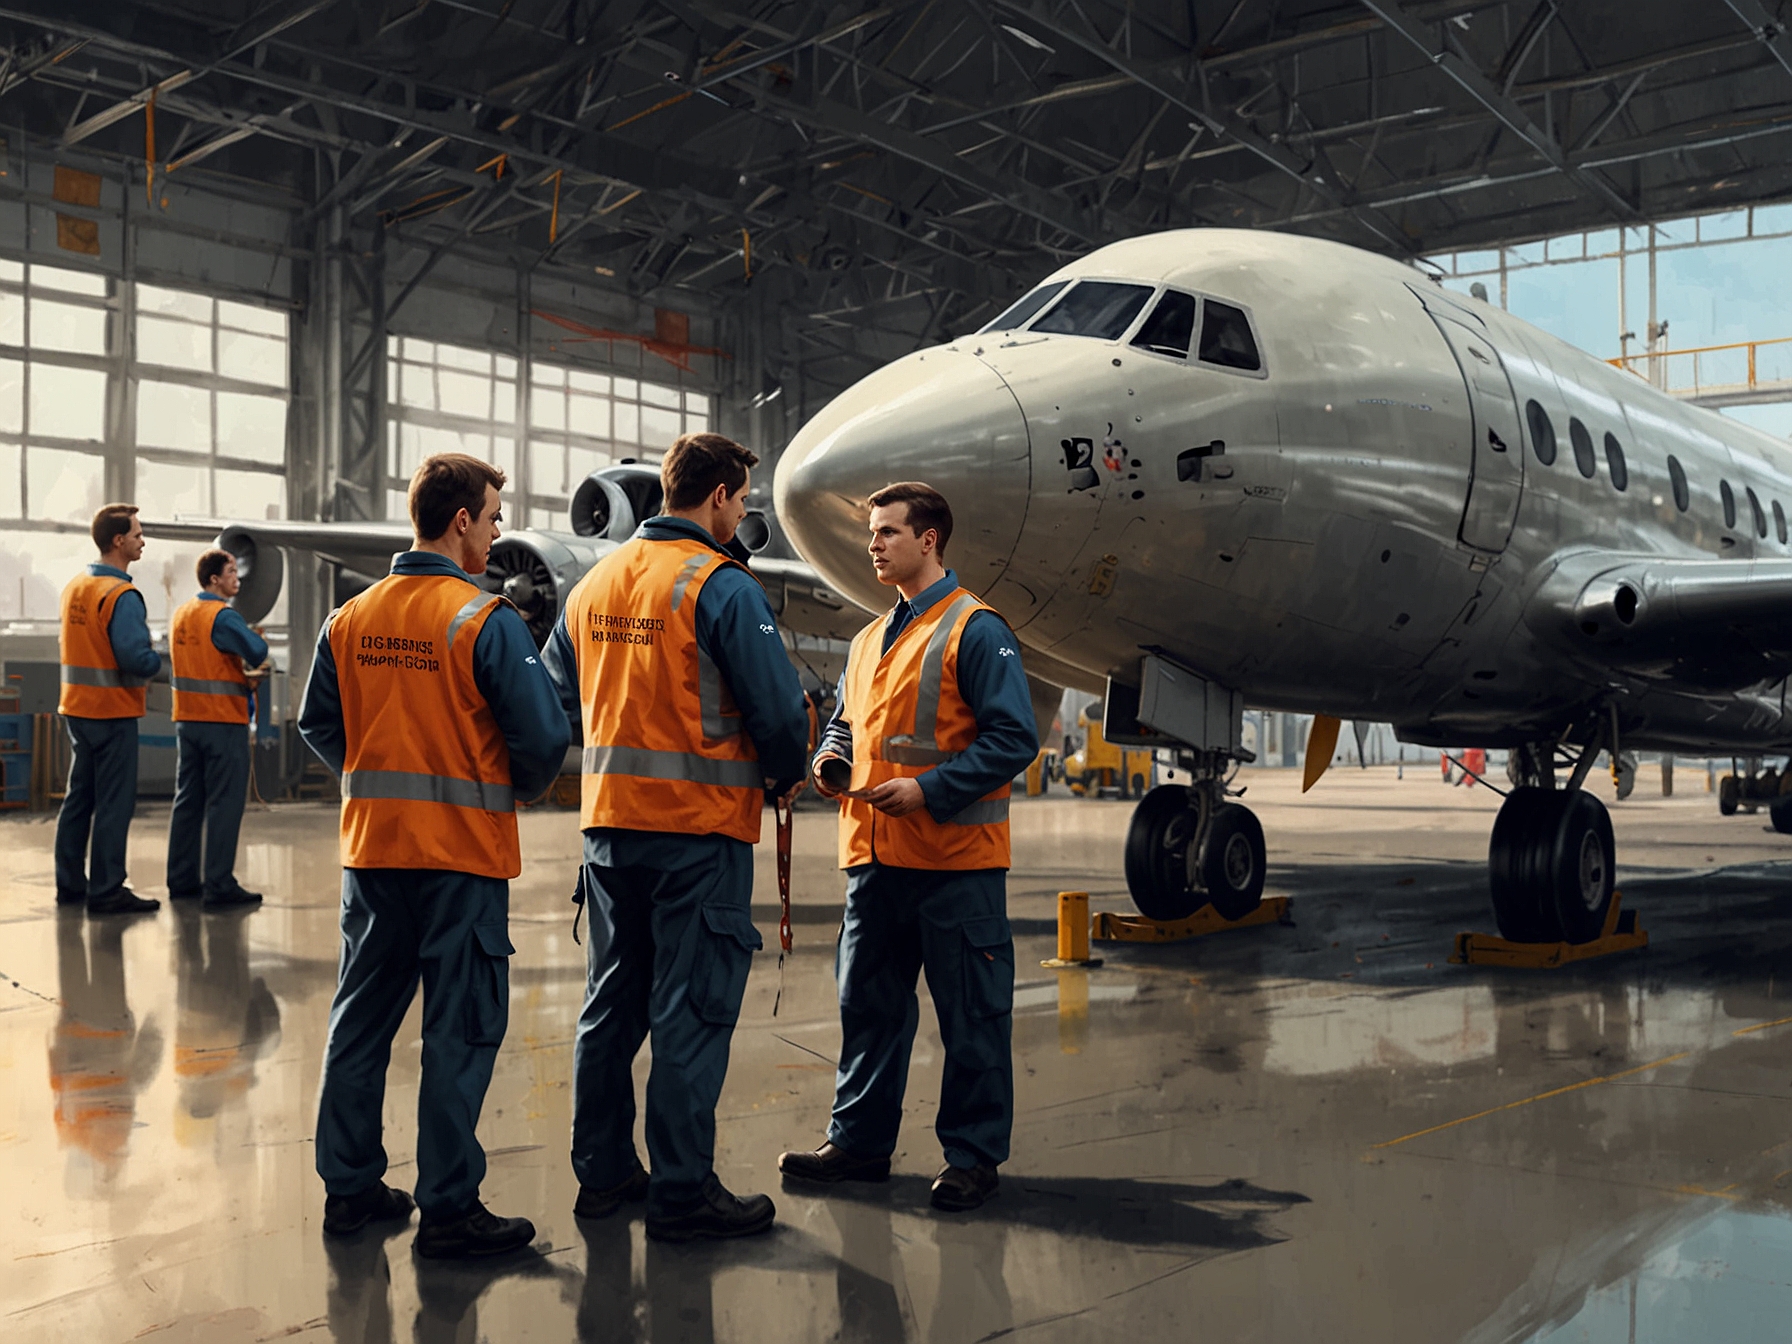 An image showing a team of aircraft mechanics conducting a pre-flight inspection, highlighting the rigorous safety checks carried out to ensure passenger safety.